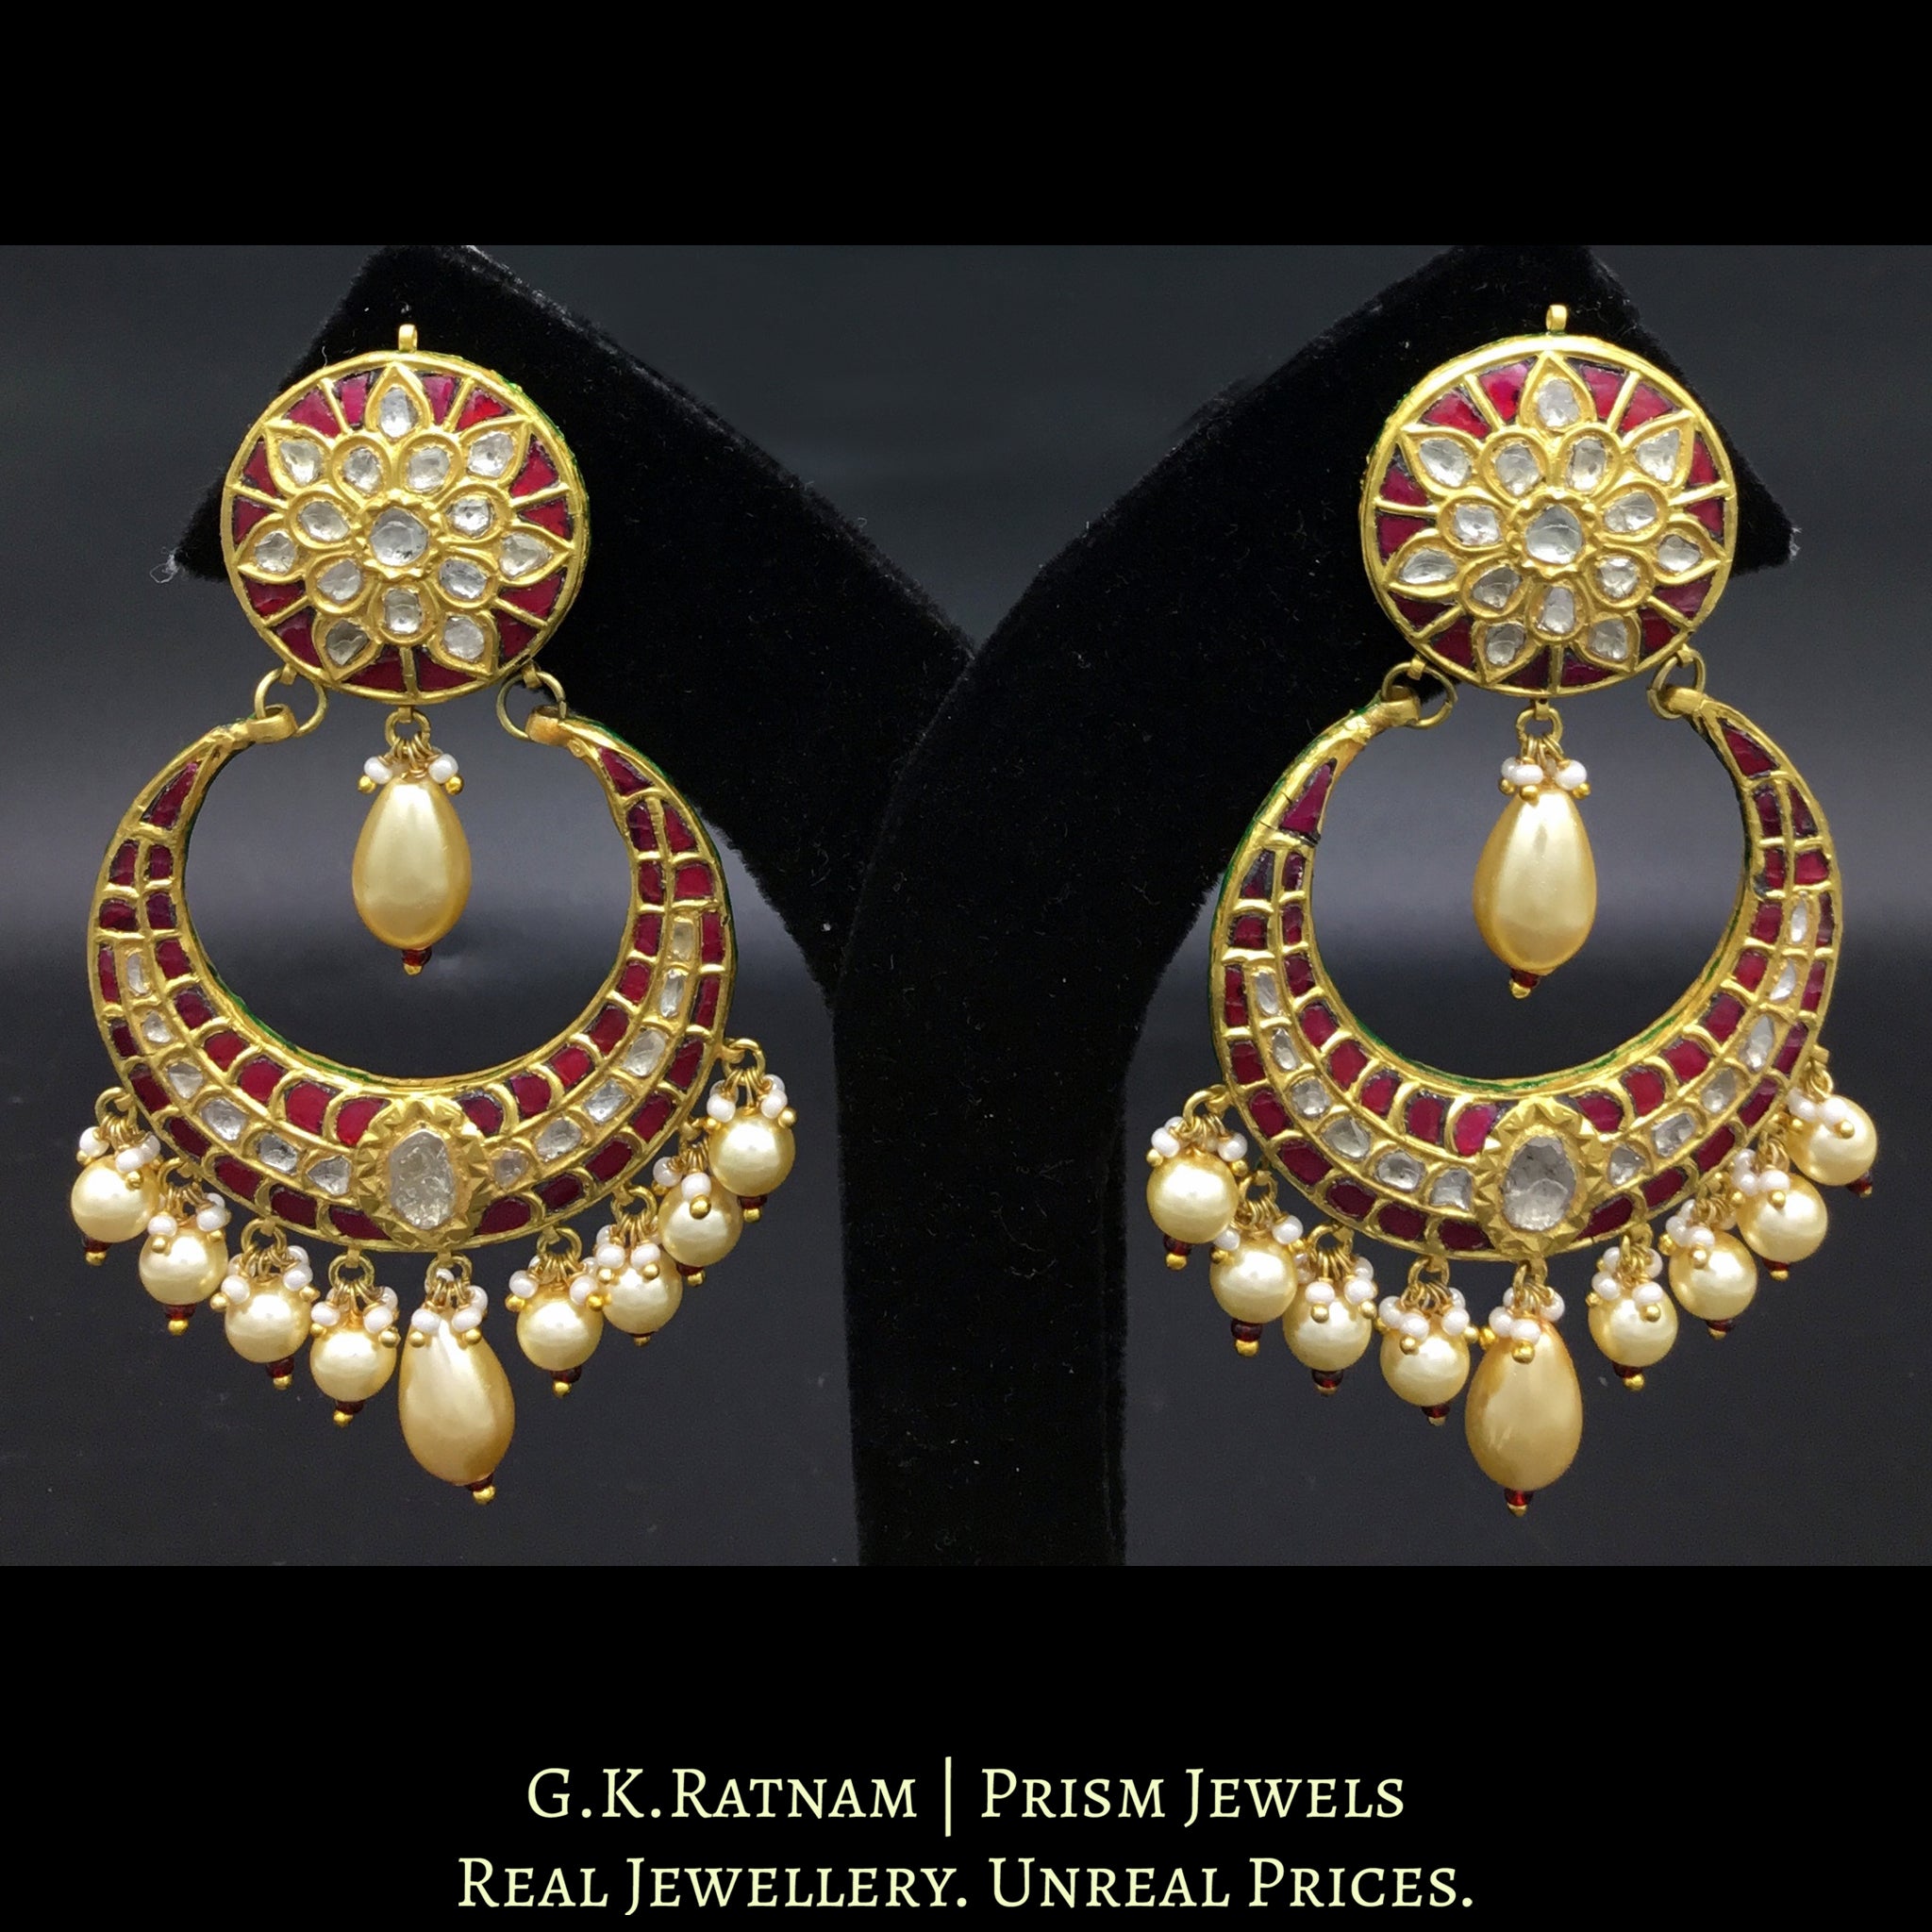 23k Gold and Diamond Polki Chand Bali Earring Pair with ruby-red stones and shell pearl clusters